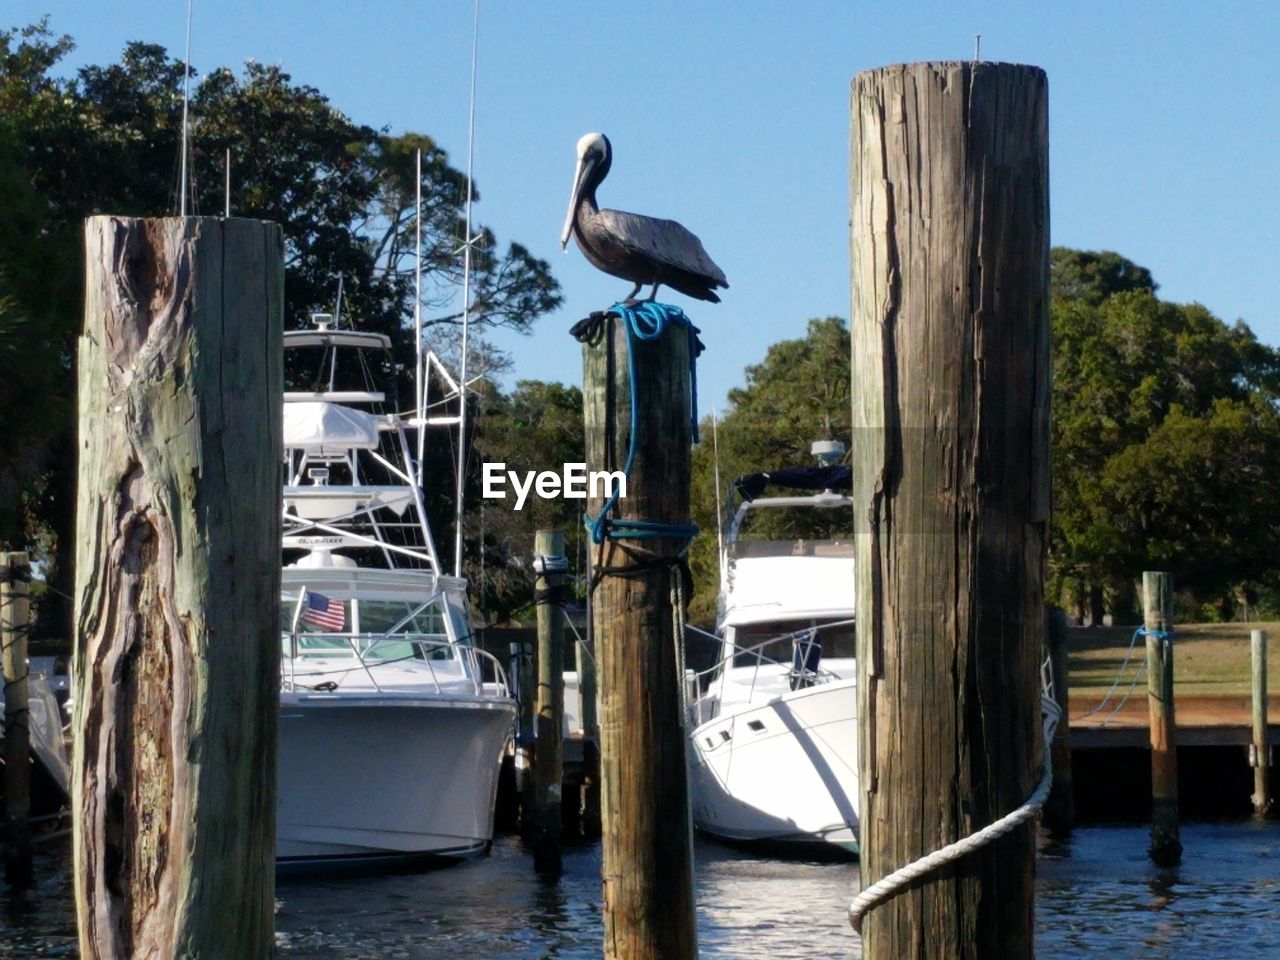 SEAGULLS PERCHING ON WOODEN POST IN LAKE